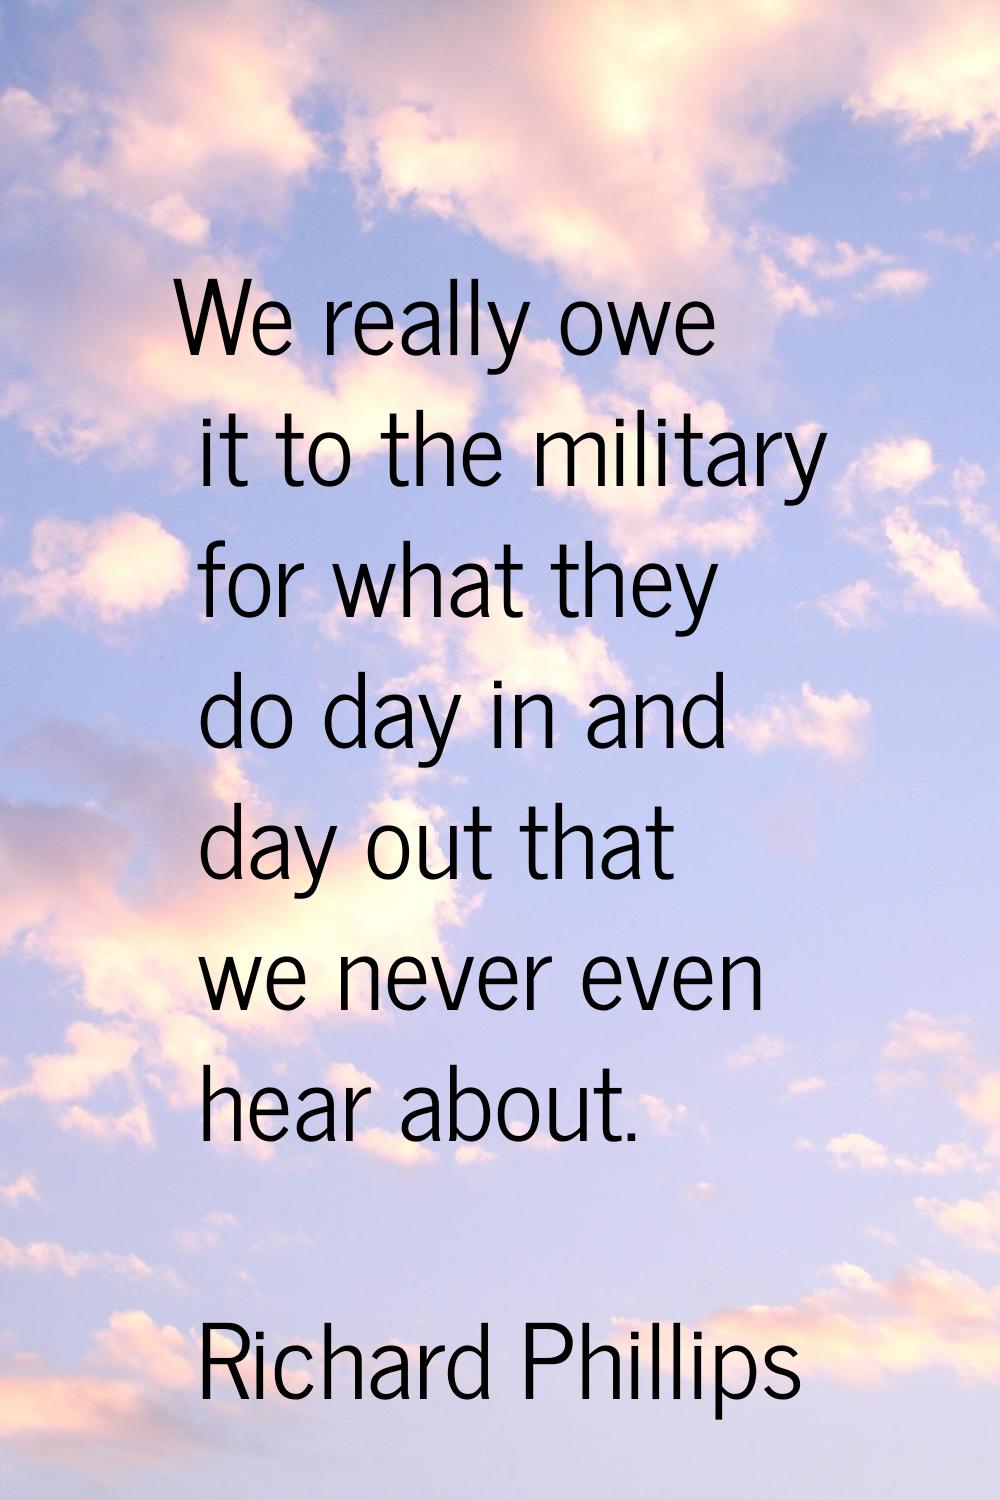 We really owe it to the military for what they do day in and day out that we never even hear about.